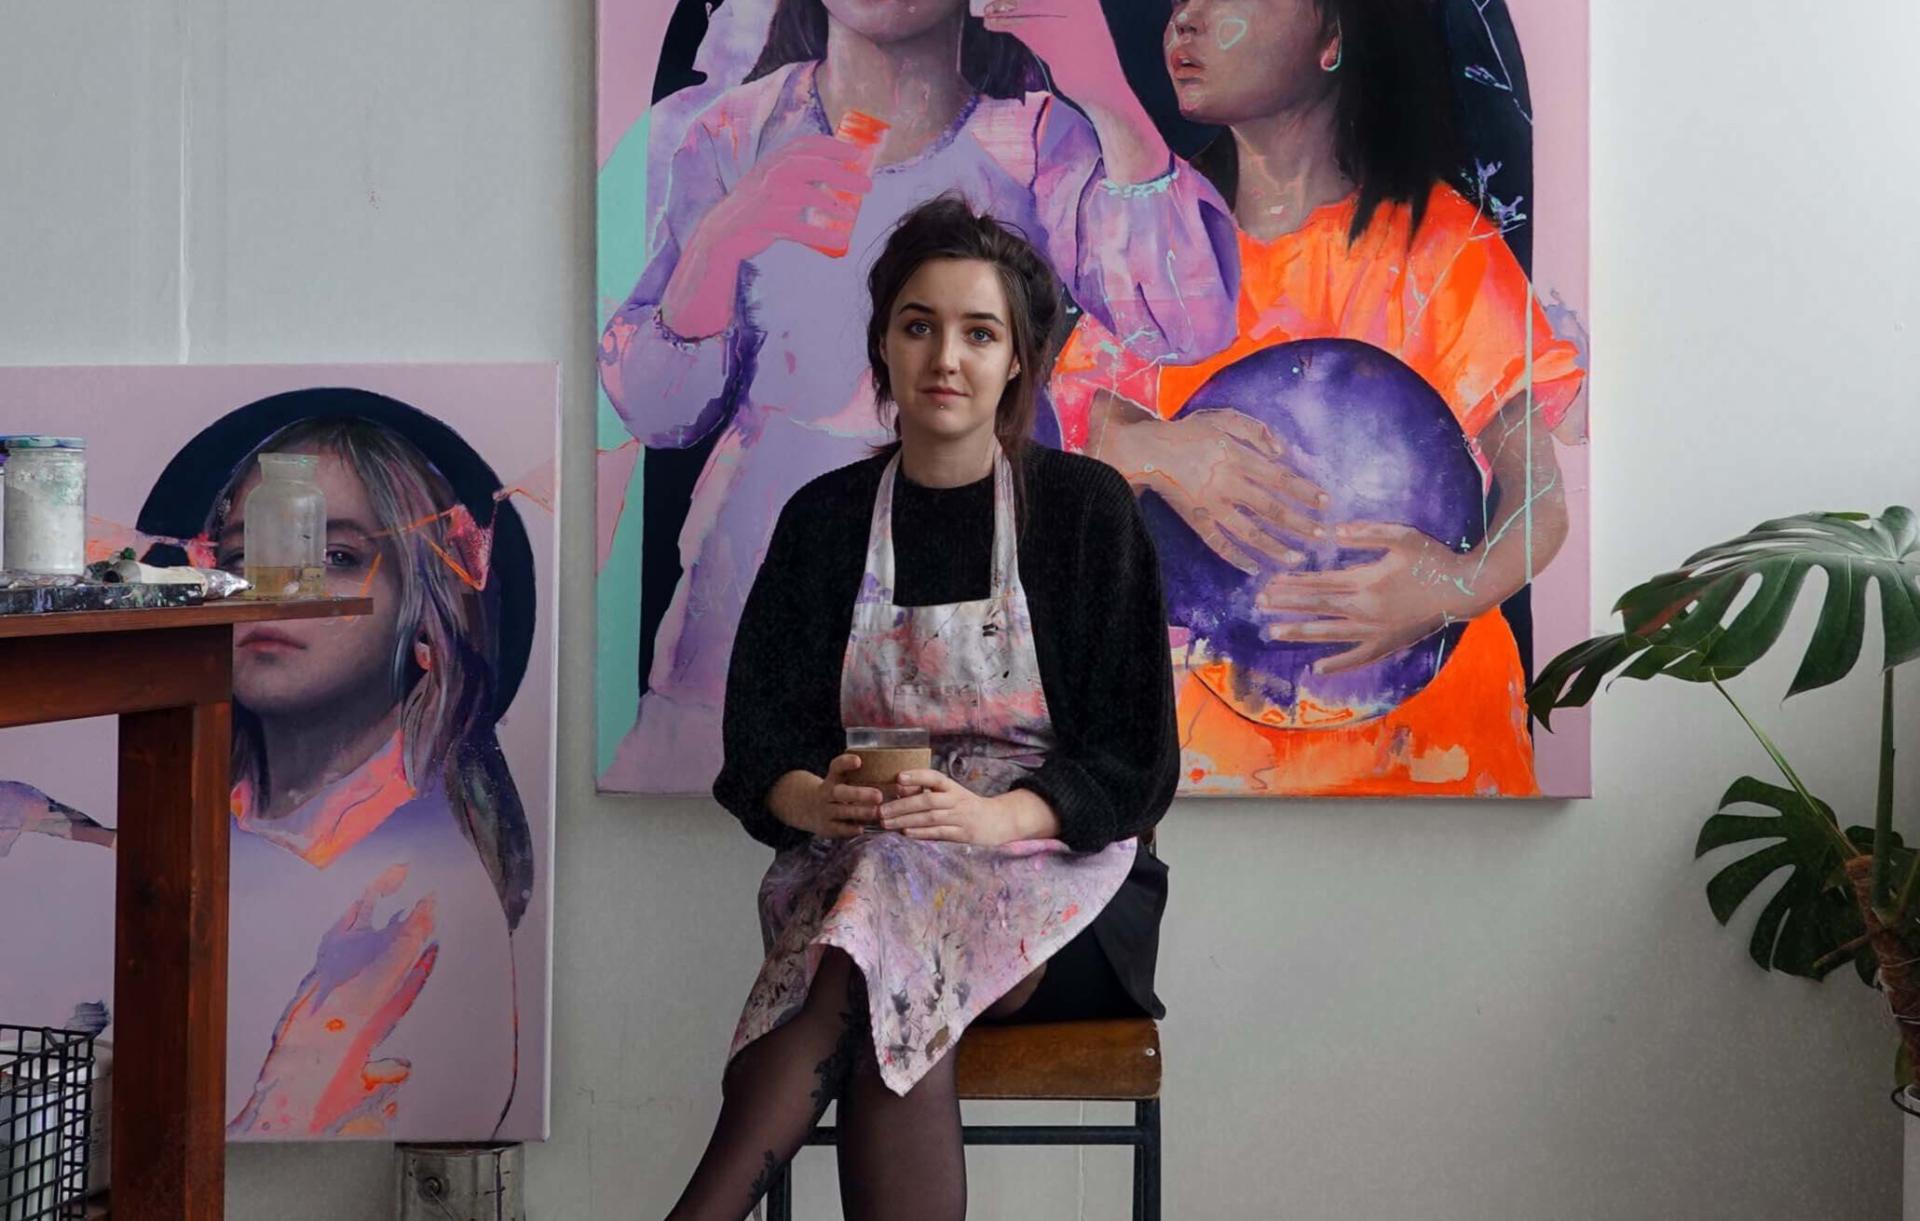 Artist Alana Barton, a girl with long brown hair tied up wearing a grey jumper sits in her studio